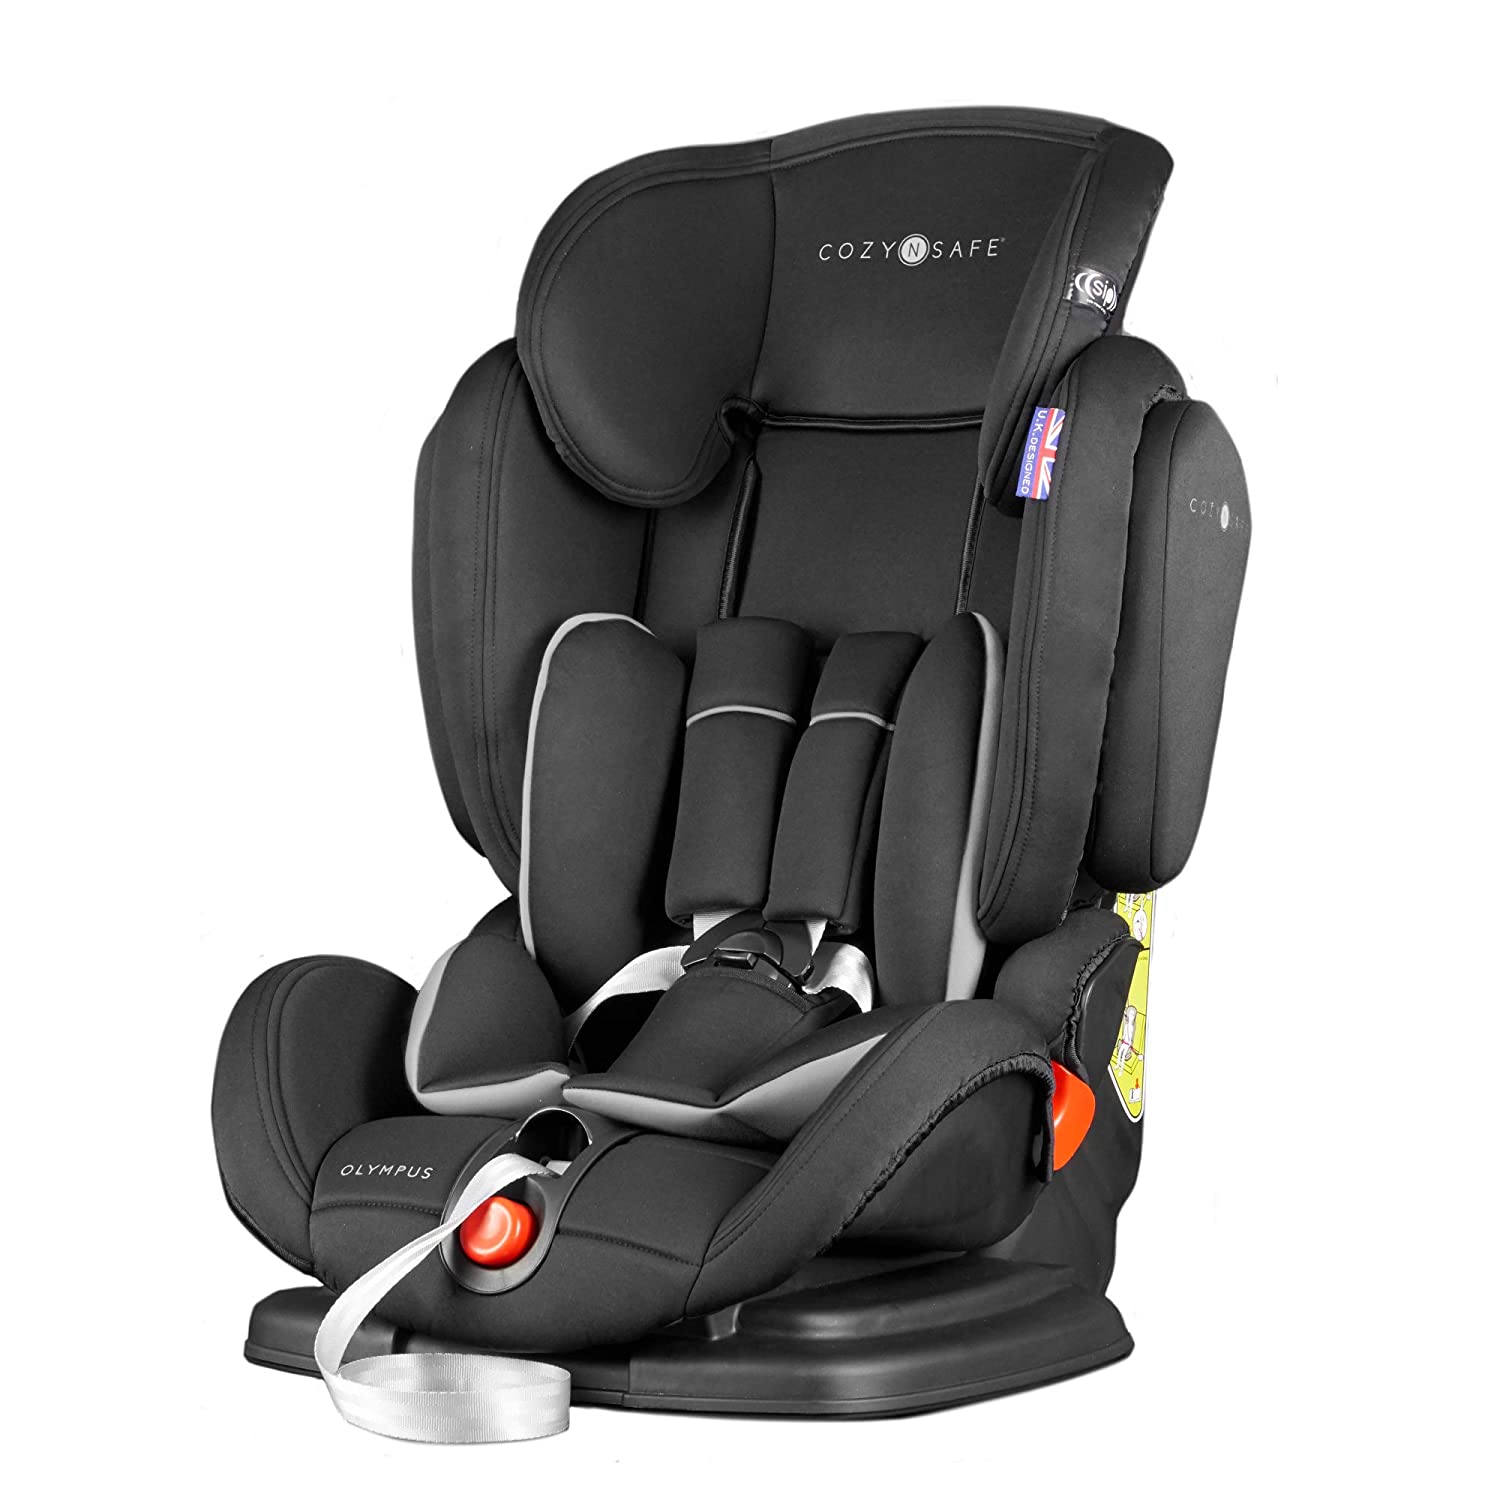 Cozy N Safe Olympus Group 1/2/3 Booster Car Seat